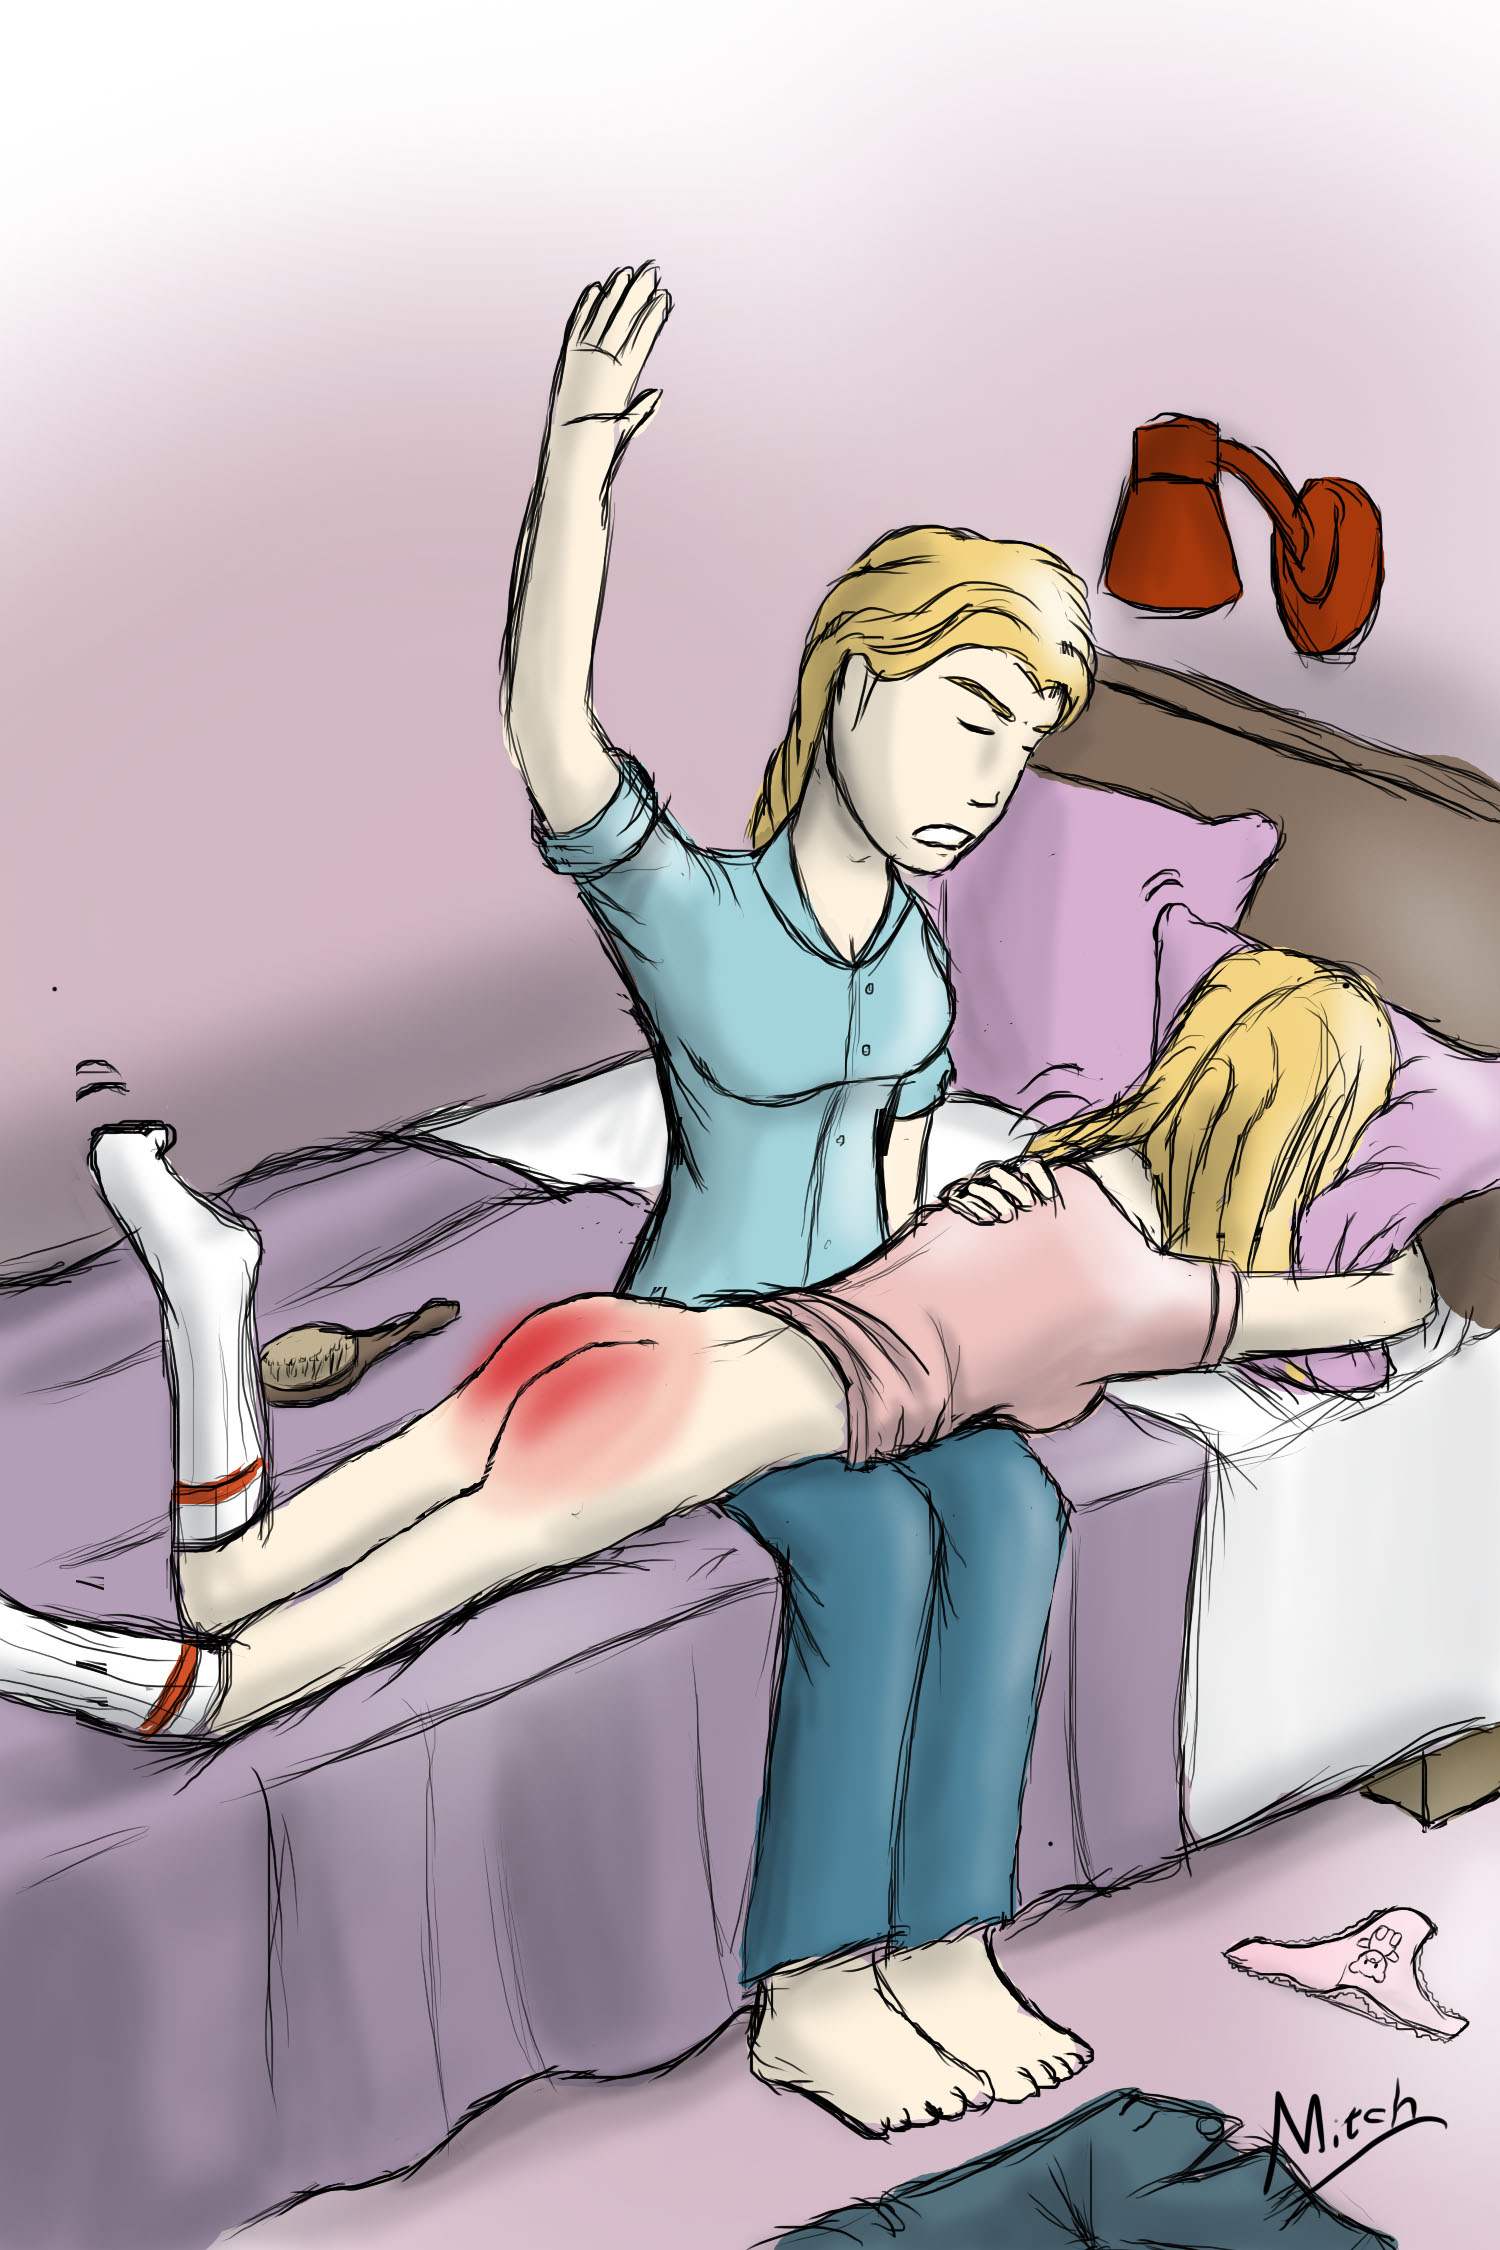 Spanked By Mom Spanking Slumber Party